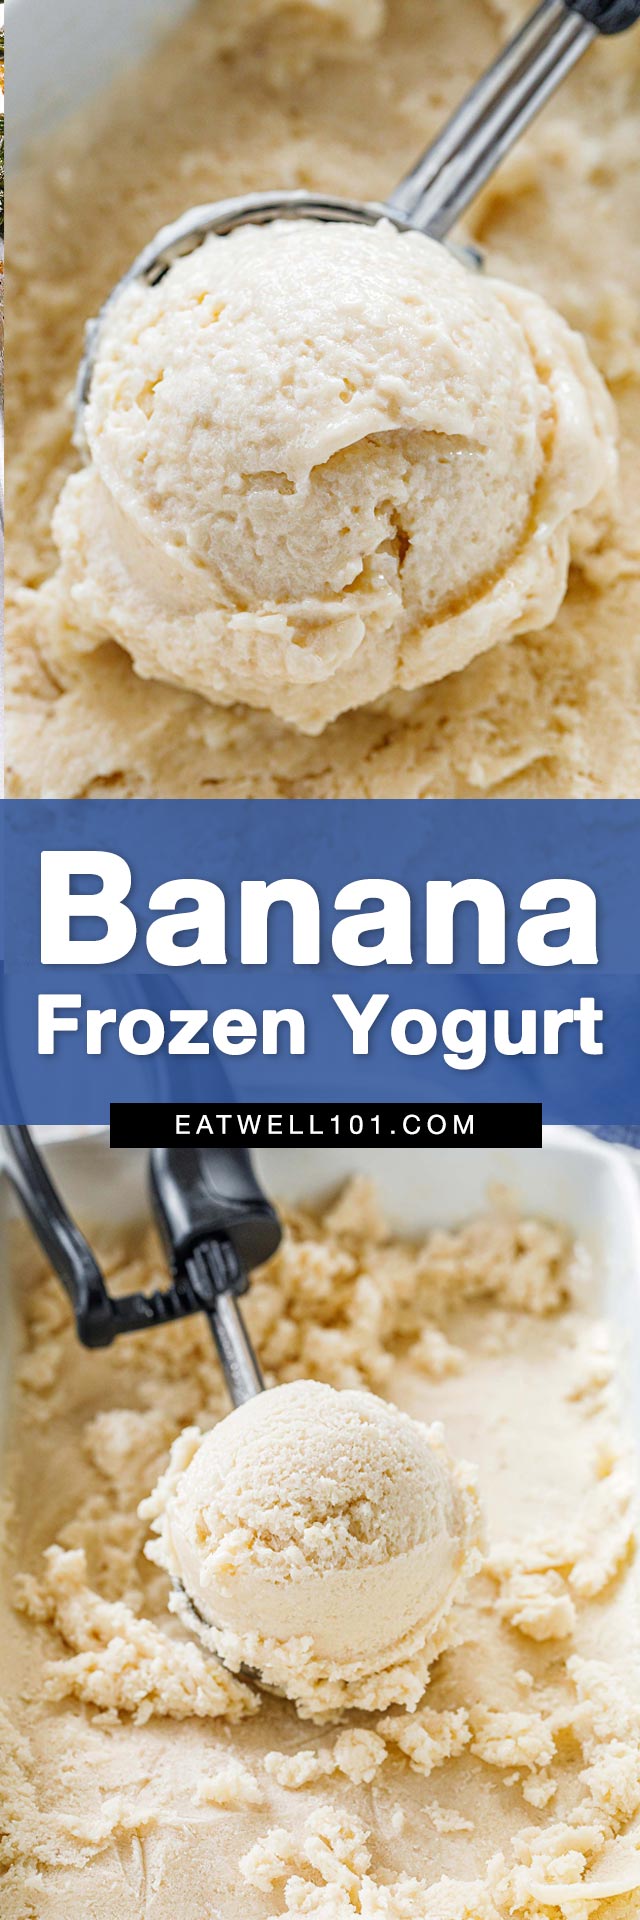 2-Ingredients Banana Frozen Yogurt - #banana #recipe #eatwell101 - This banana frozen yogurt is made with only 2 ingredients and is as healthy as ice cream gets.